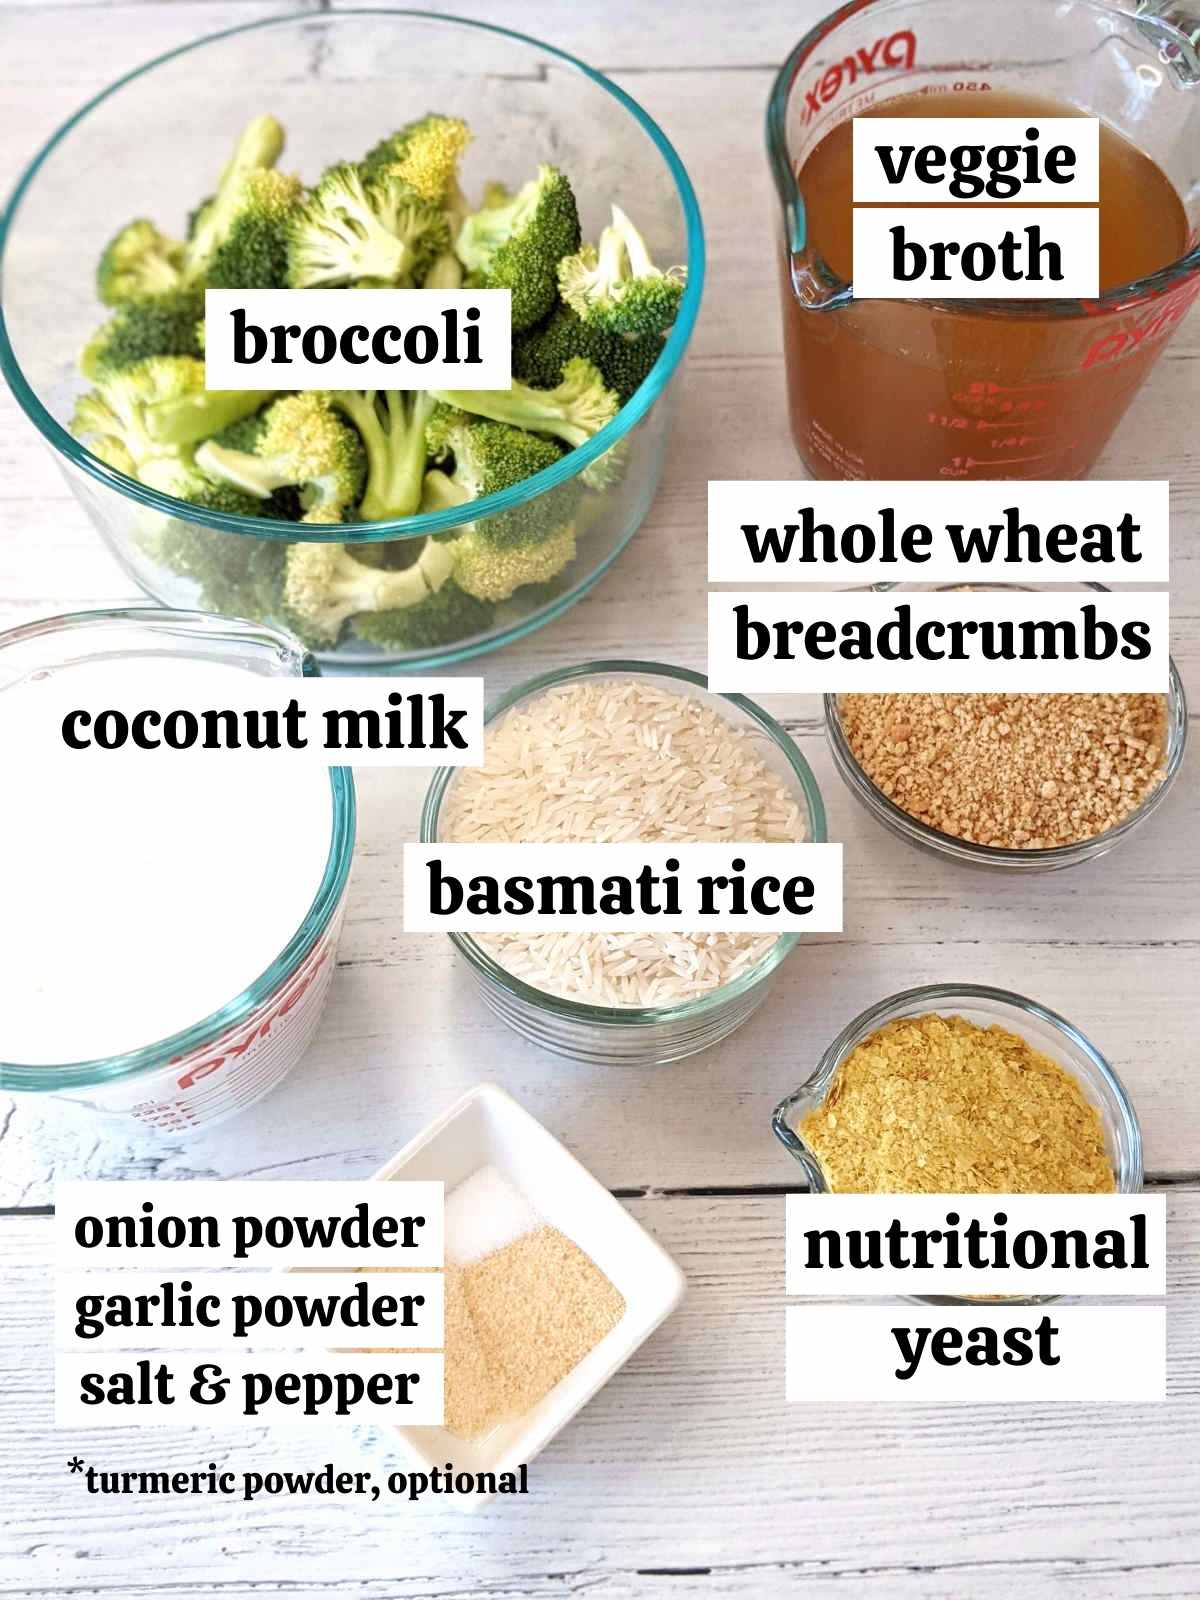 Ingredients for the vegan cheesy broccoli rice casserole measured and labelled.